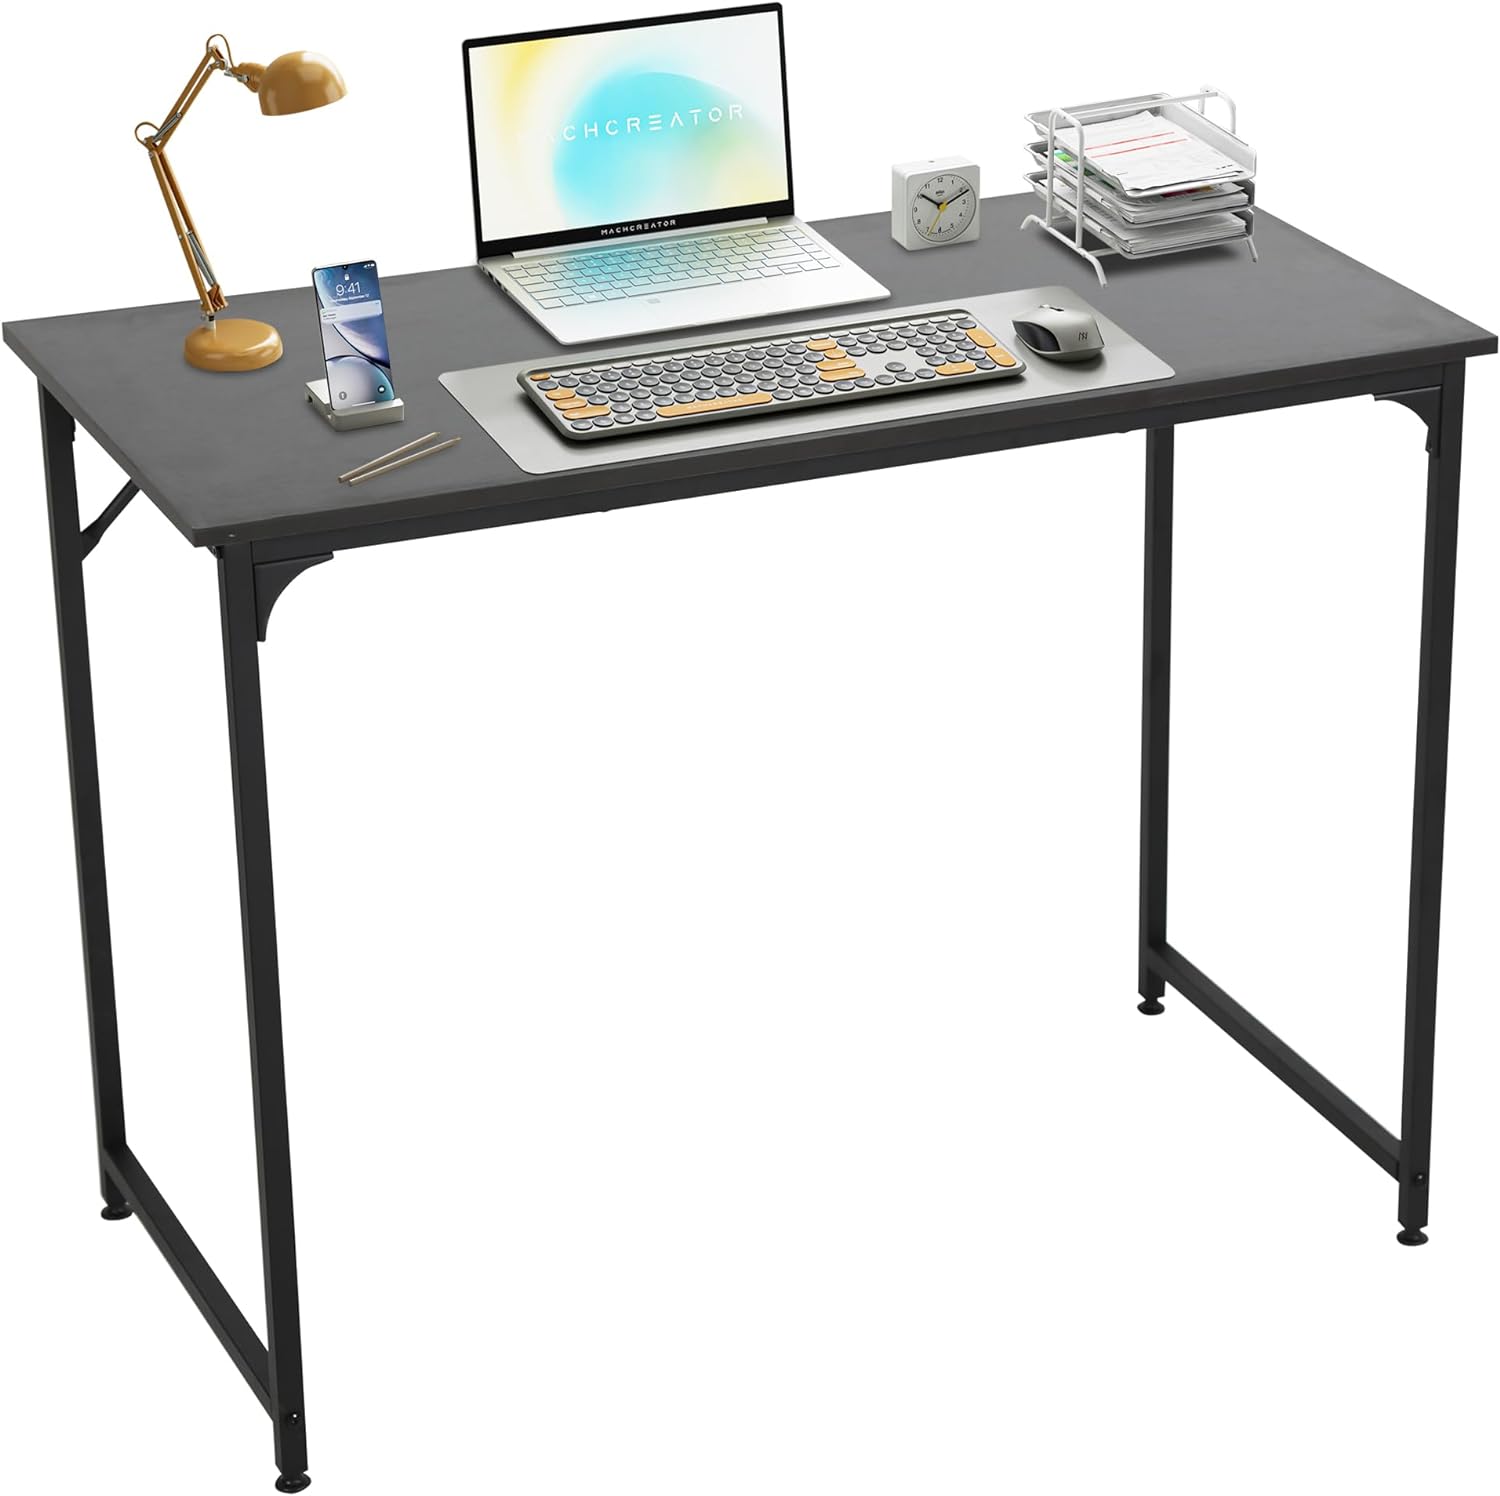 PayLessHere 39 inch Computer Desk Modern Writing Desk, Simple Study Table, Industrial Office Desk, Sturdy Laptop Table for Home Office, Black - image 3 of 7